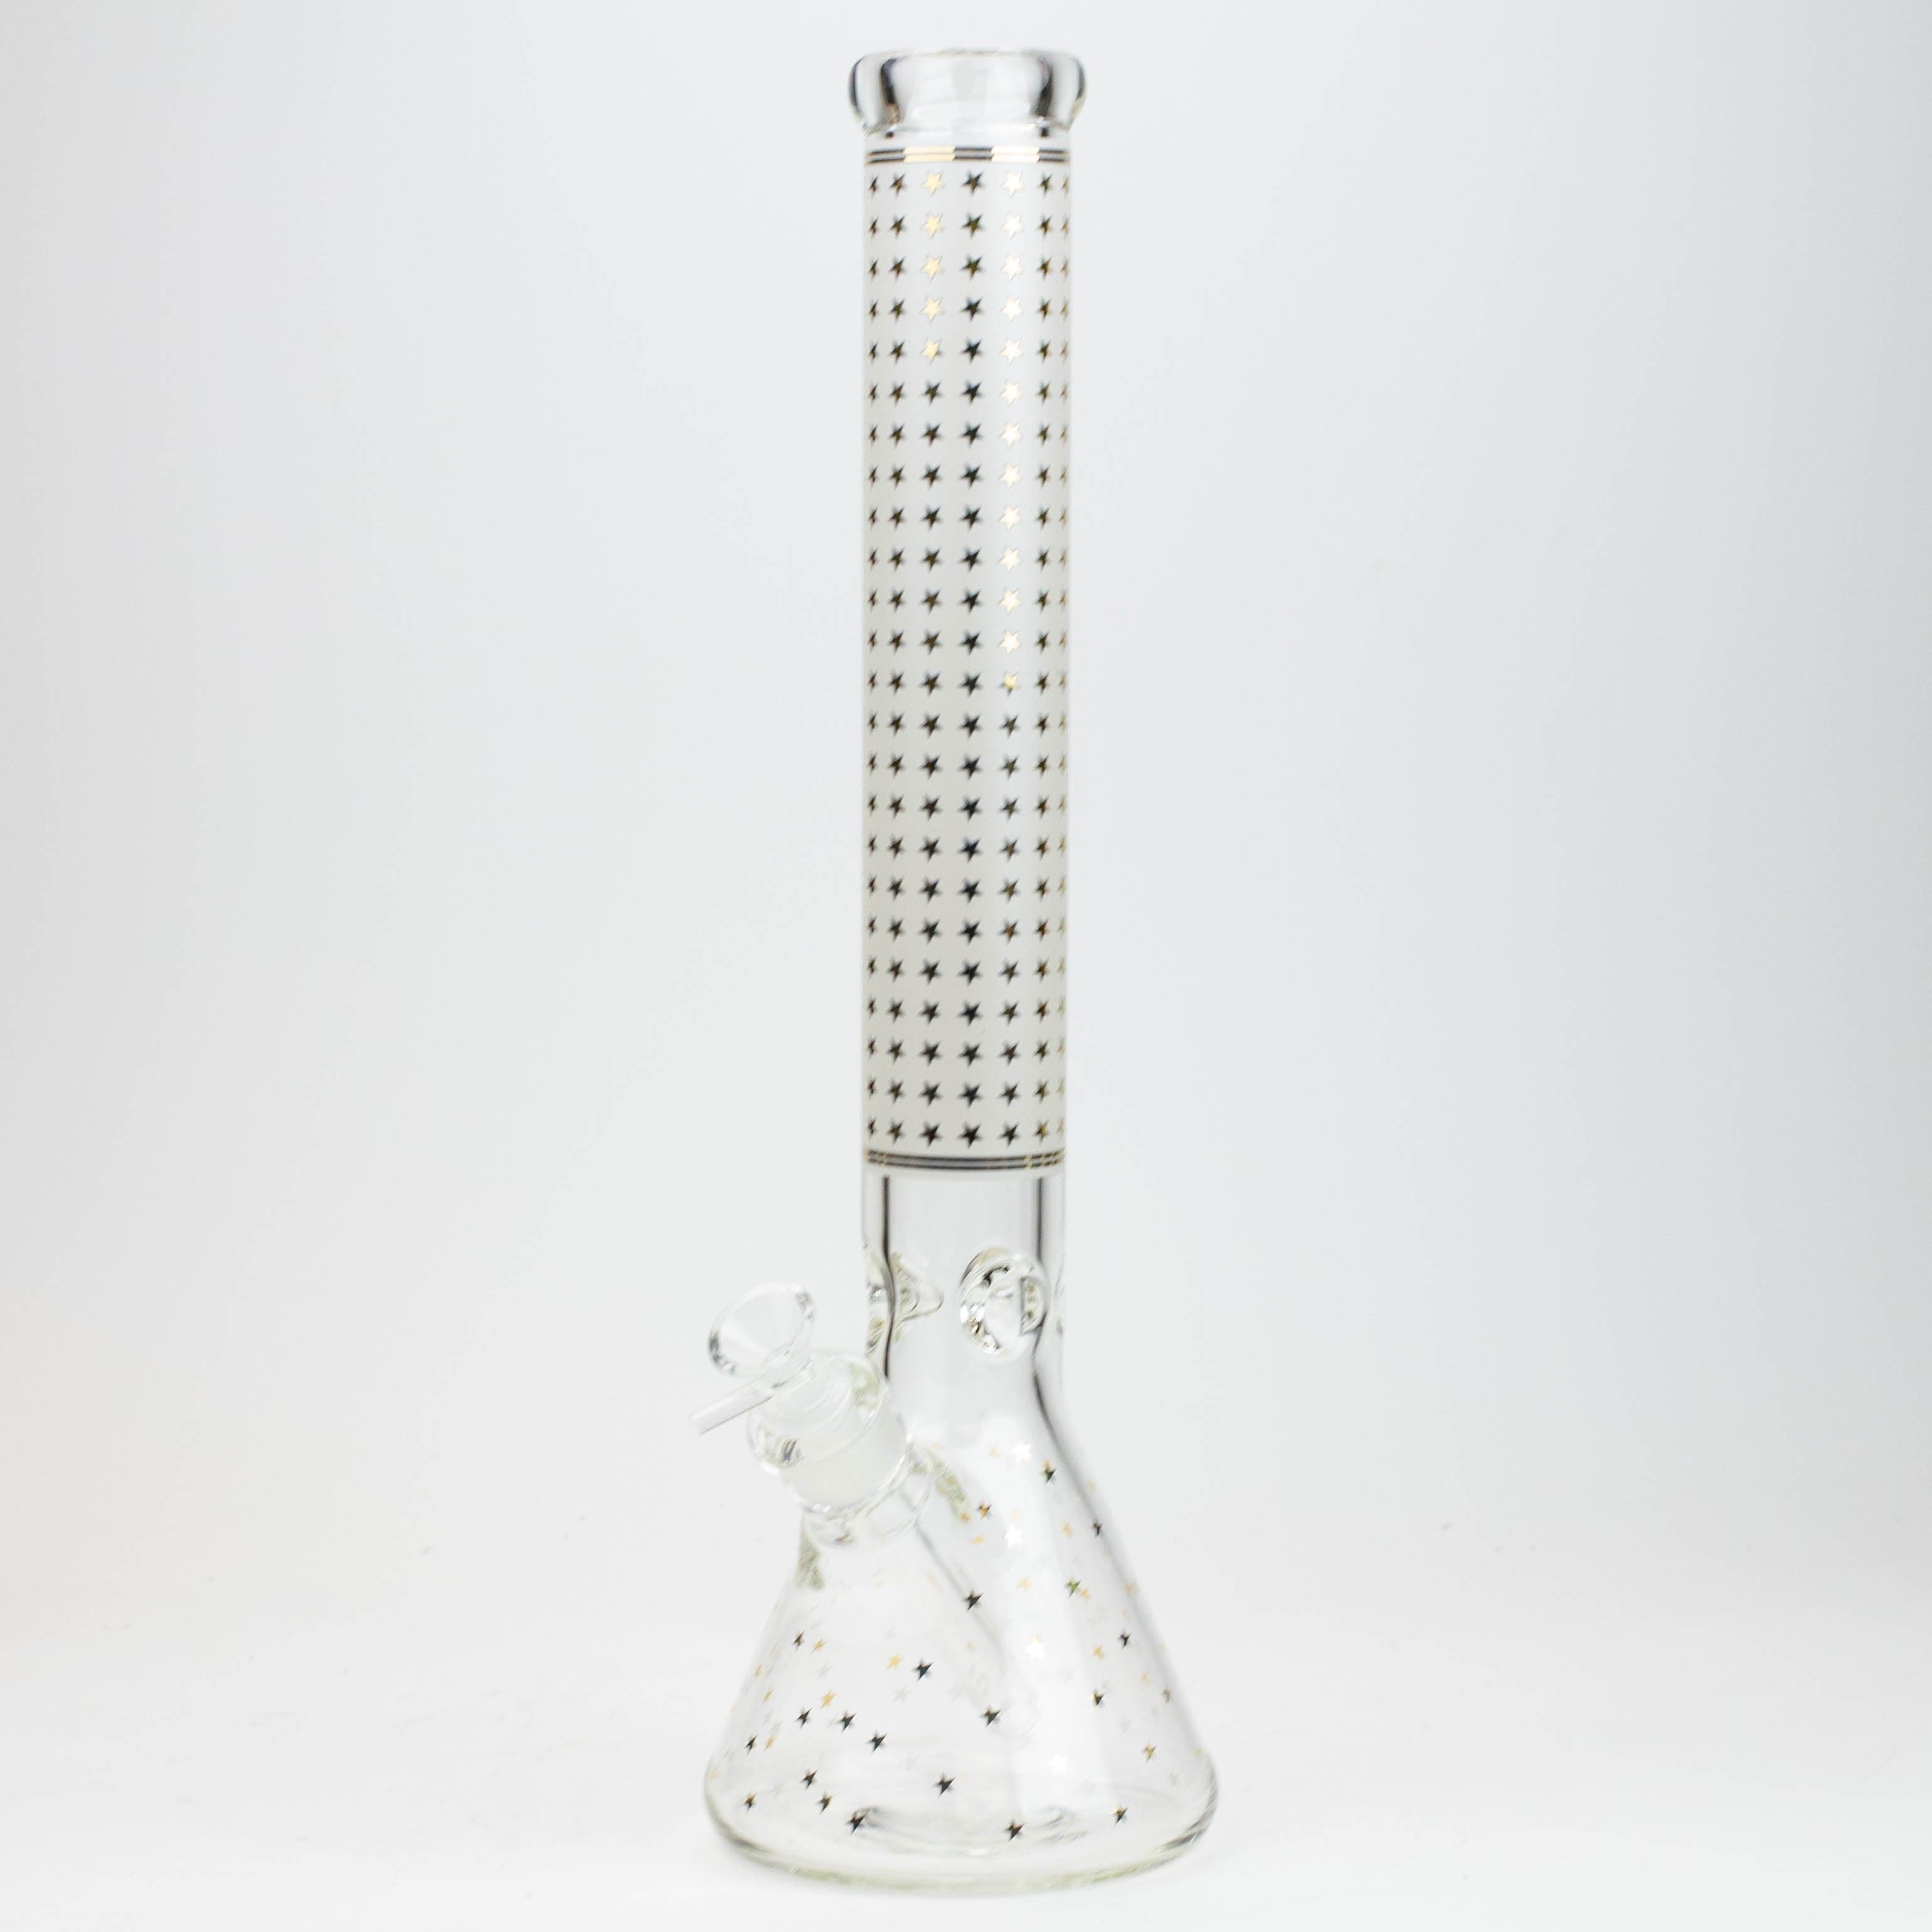 Star 7 mm glass water pipes 17.5"_2